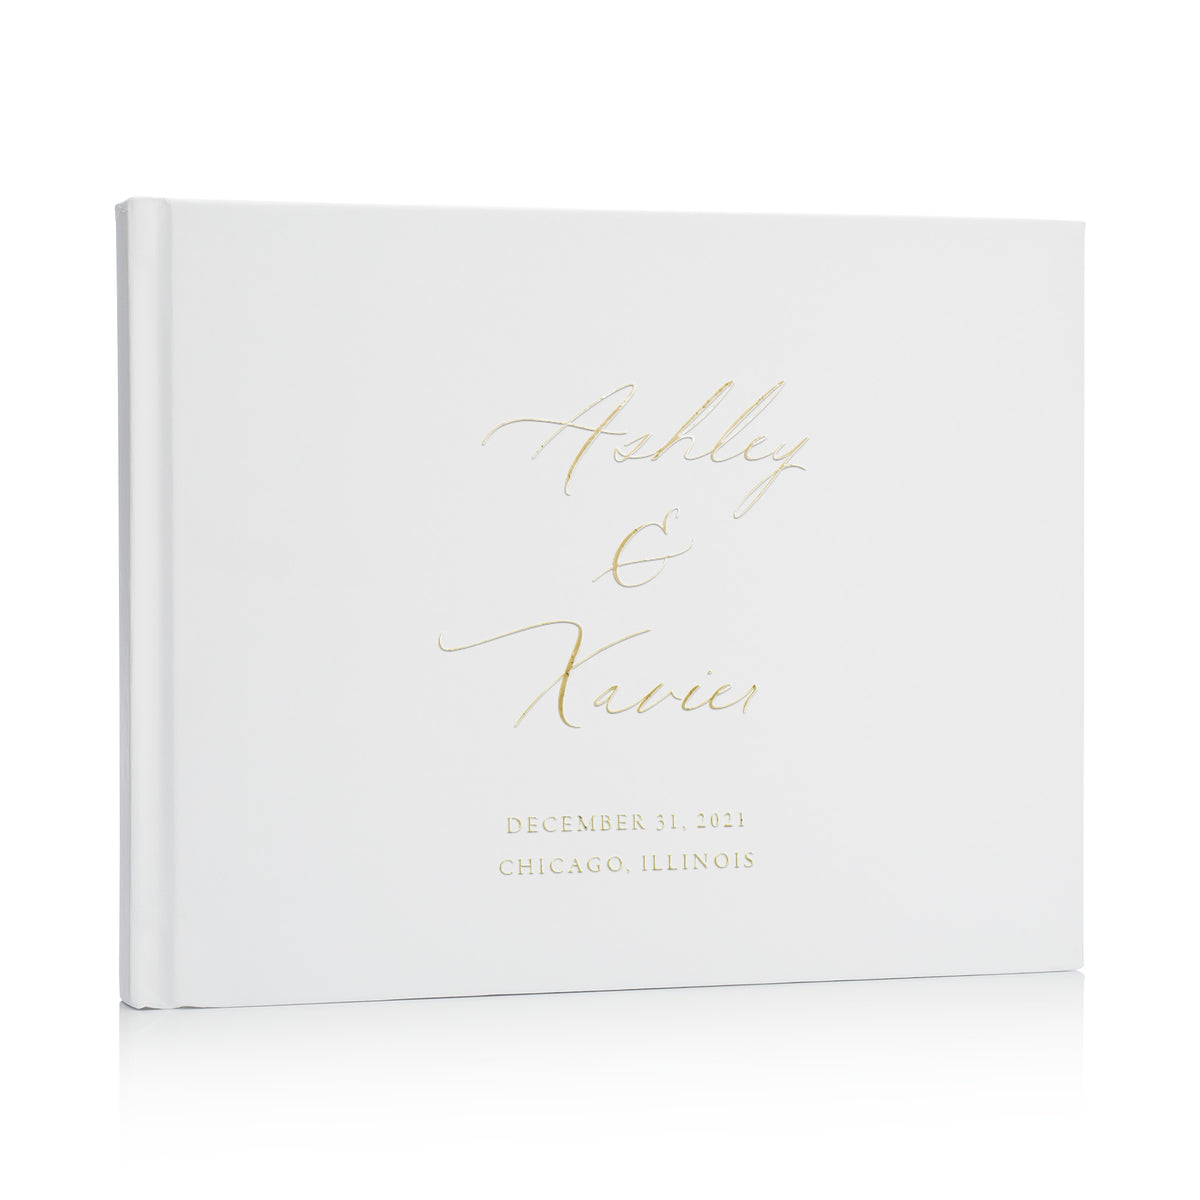 Ashley Hardcover Blank Book, Pink